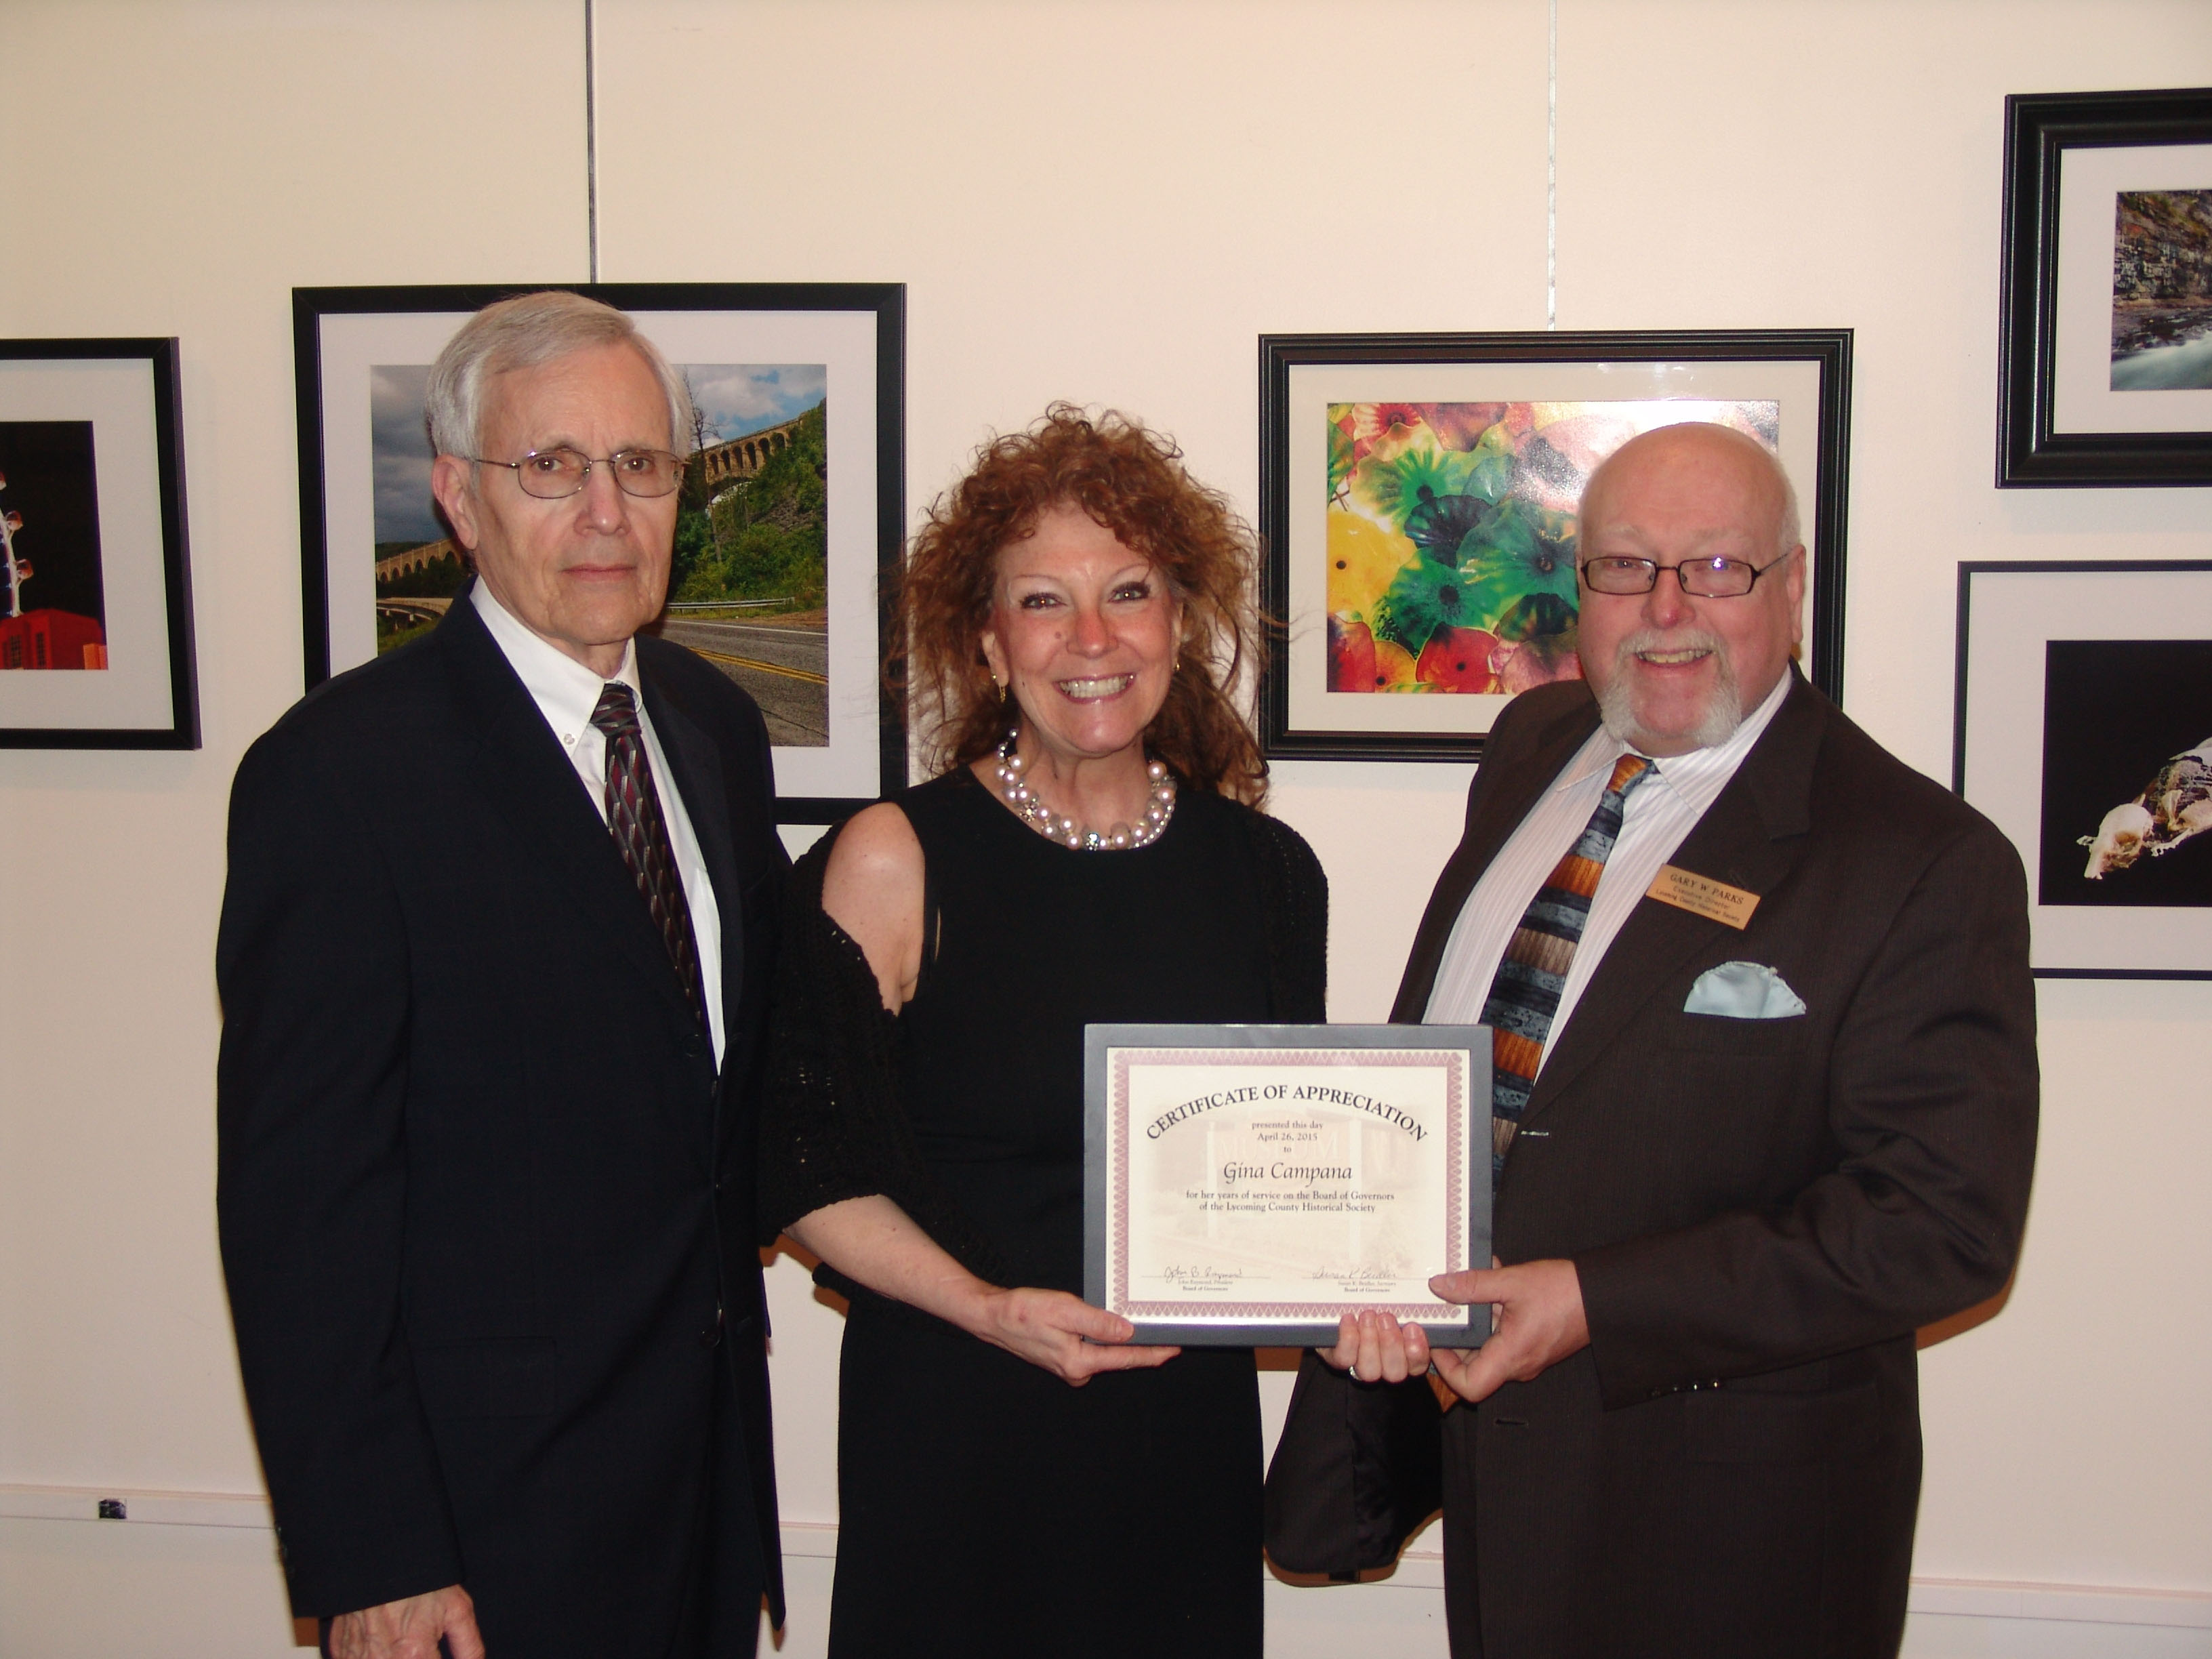 Outgoing Board member Gina Campana receiving a certificate of appreciation from newly-elected Board President Chuck Luppert and Director Gary Parks.